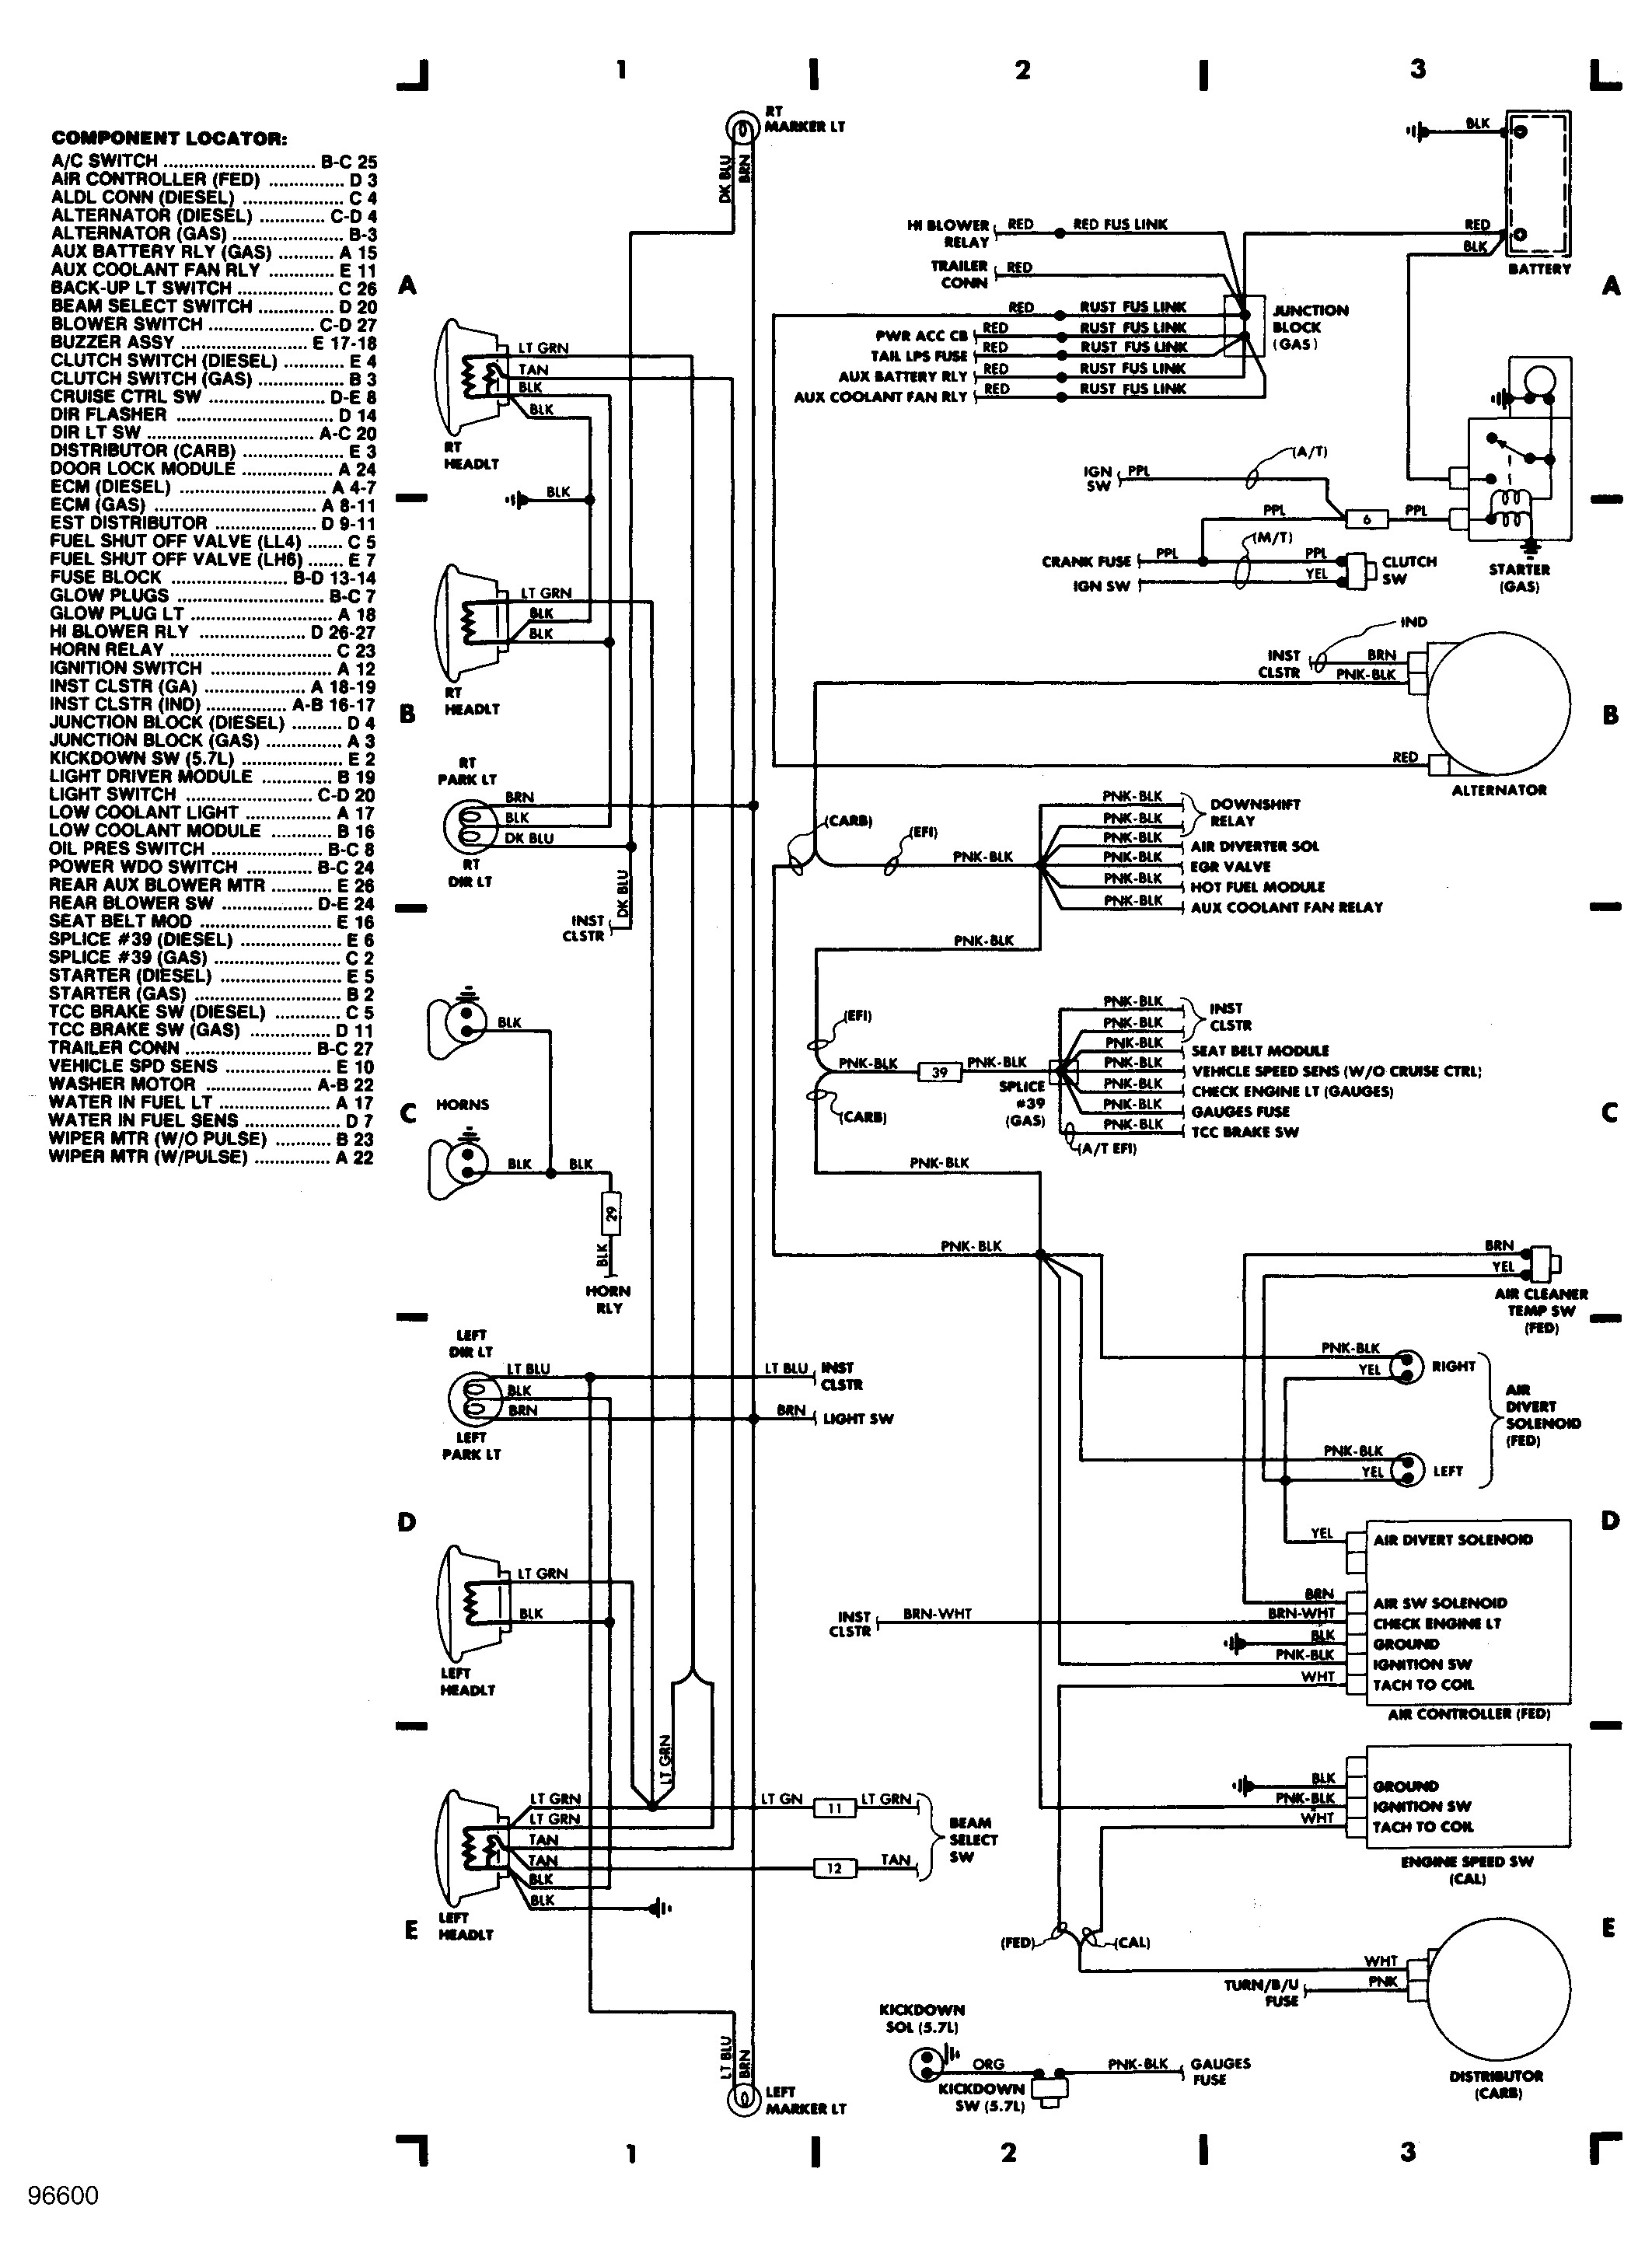 Wiring A 1985 Chevy Stering Coloumn Diagram] 1997 Chevy P30 Wiring Diagram Full Version Hd